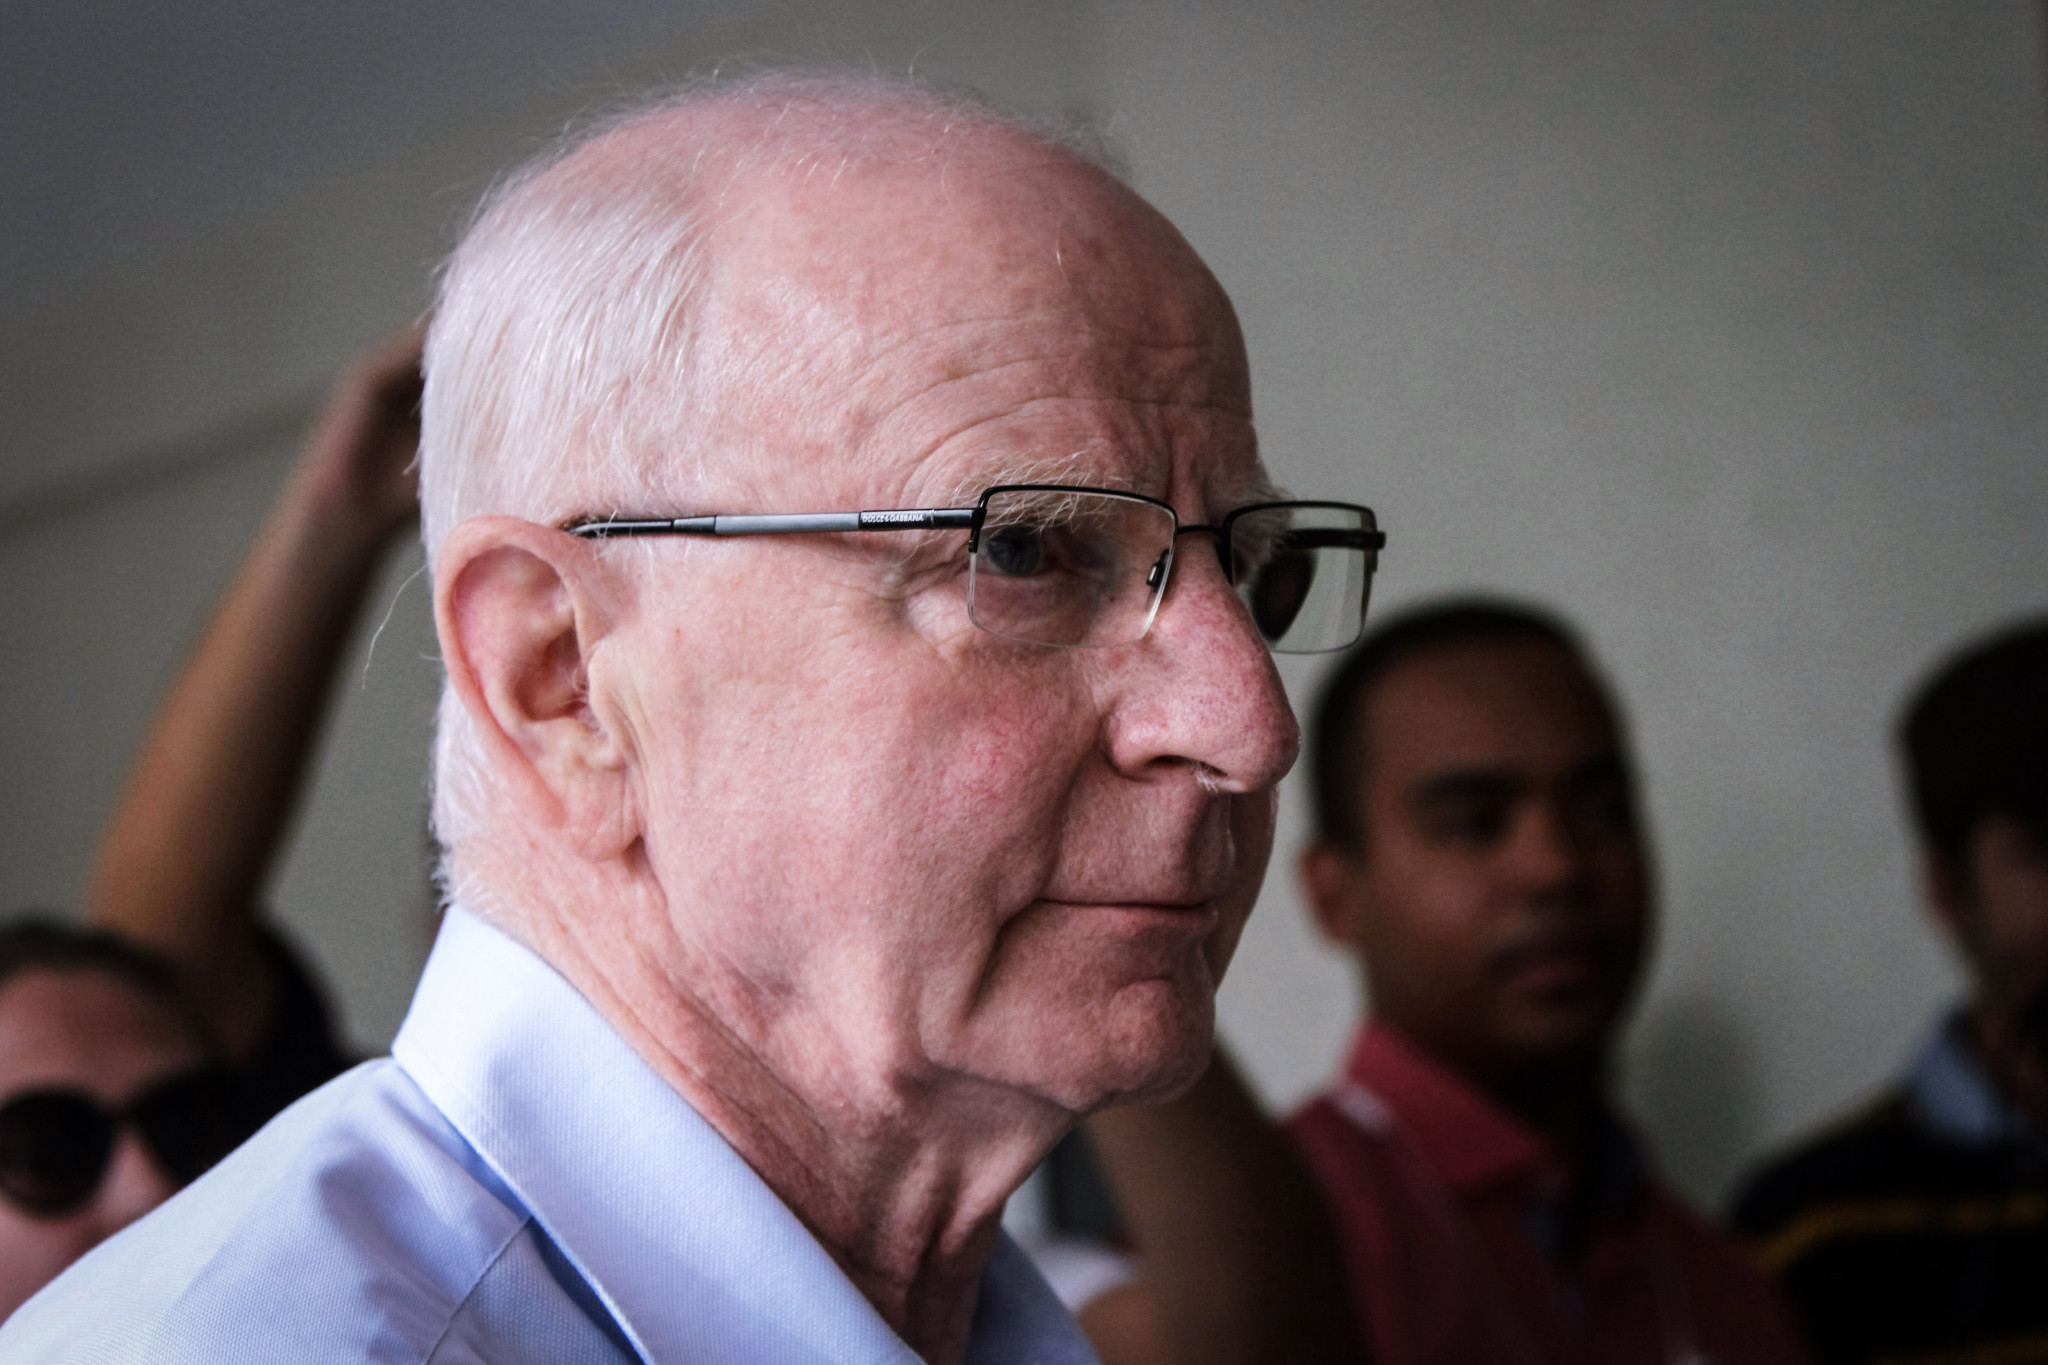 Former OFI and EOC President Pat Hickey was arrested at Rio 2016 for alleged ticket scalping ©Getty Images